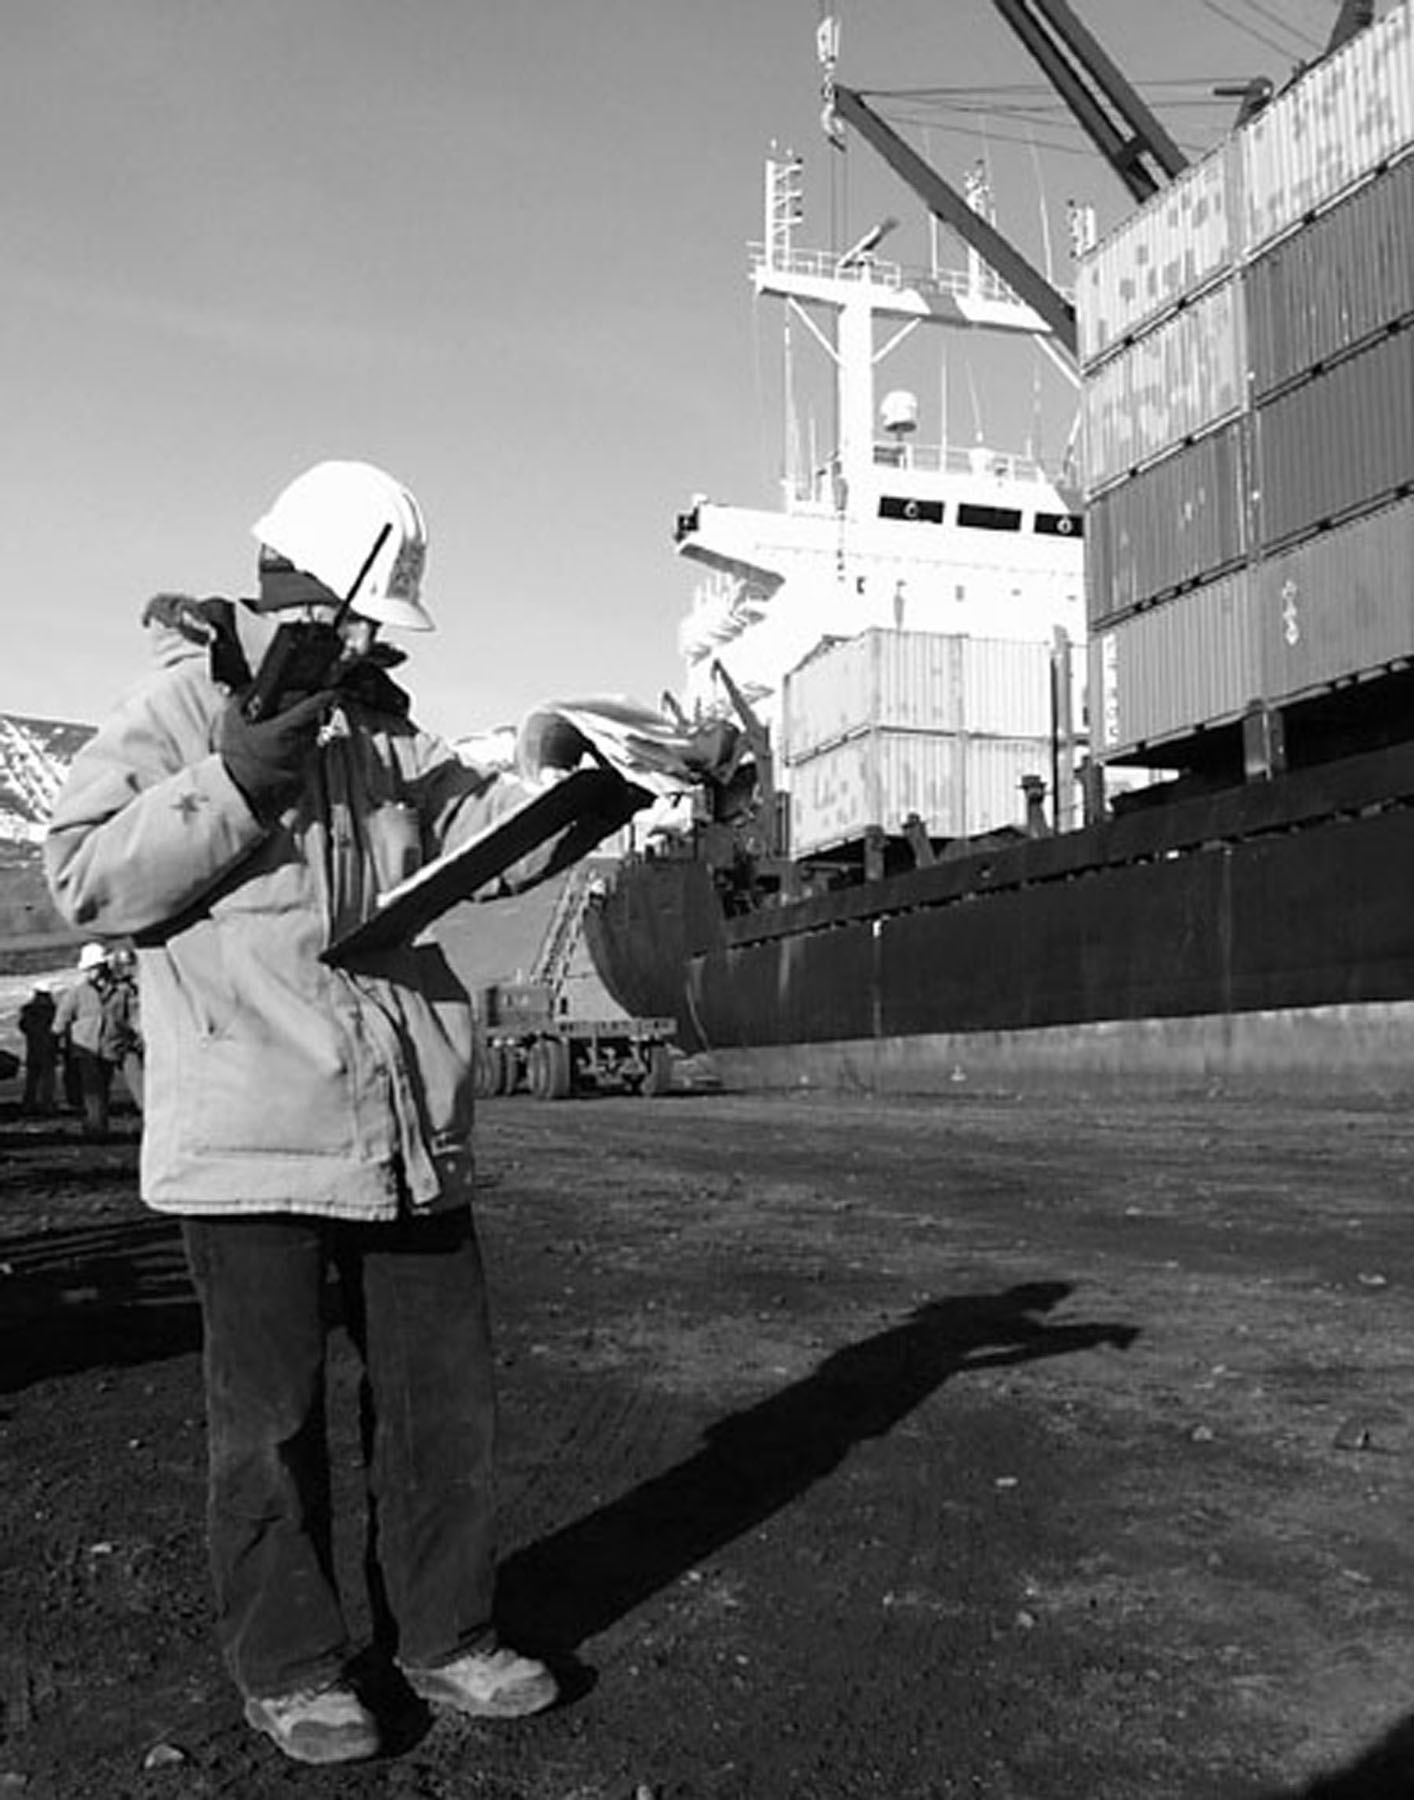 A person standing near a ship reads from a clipboard into a radio.